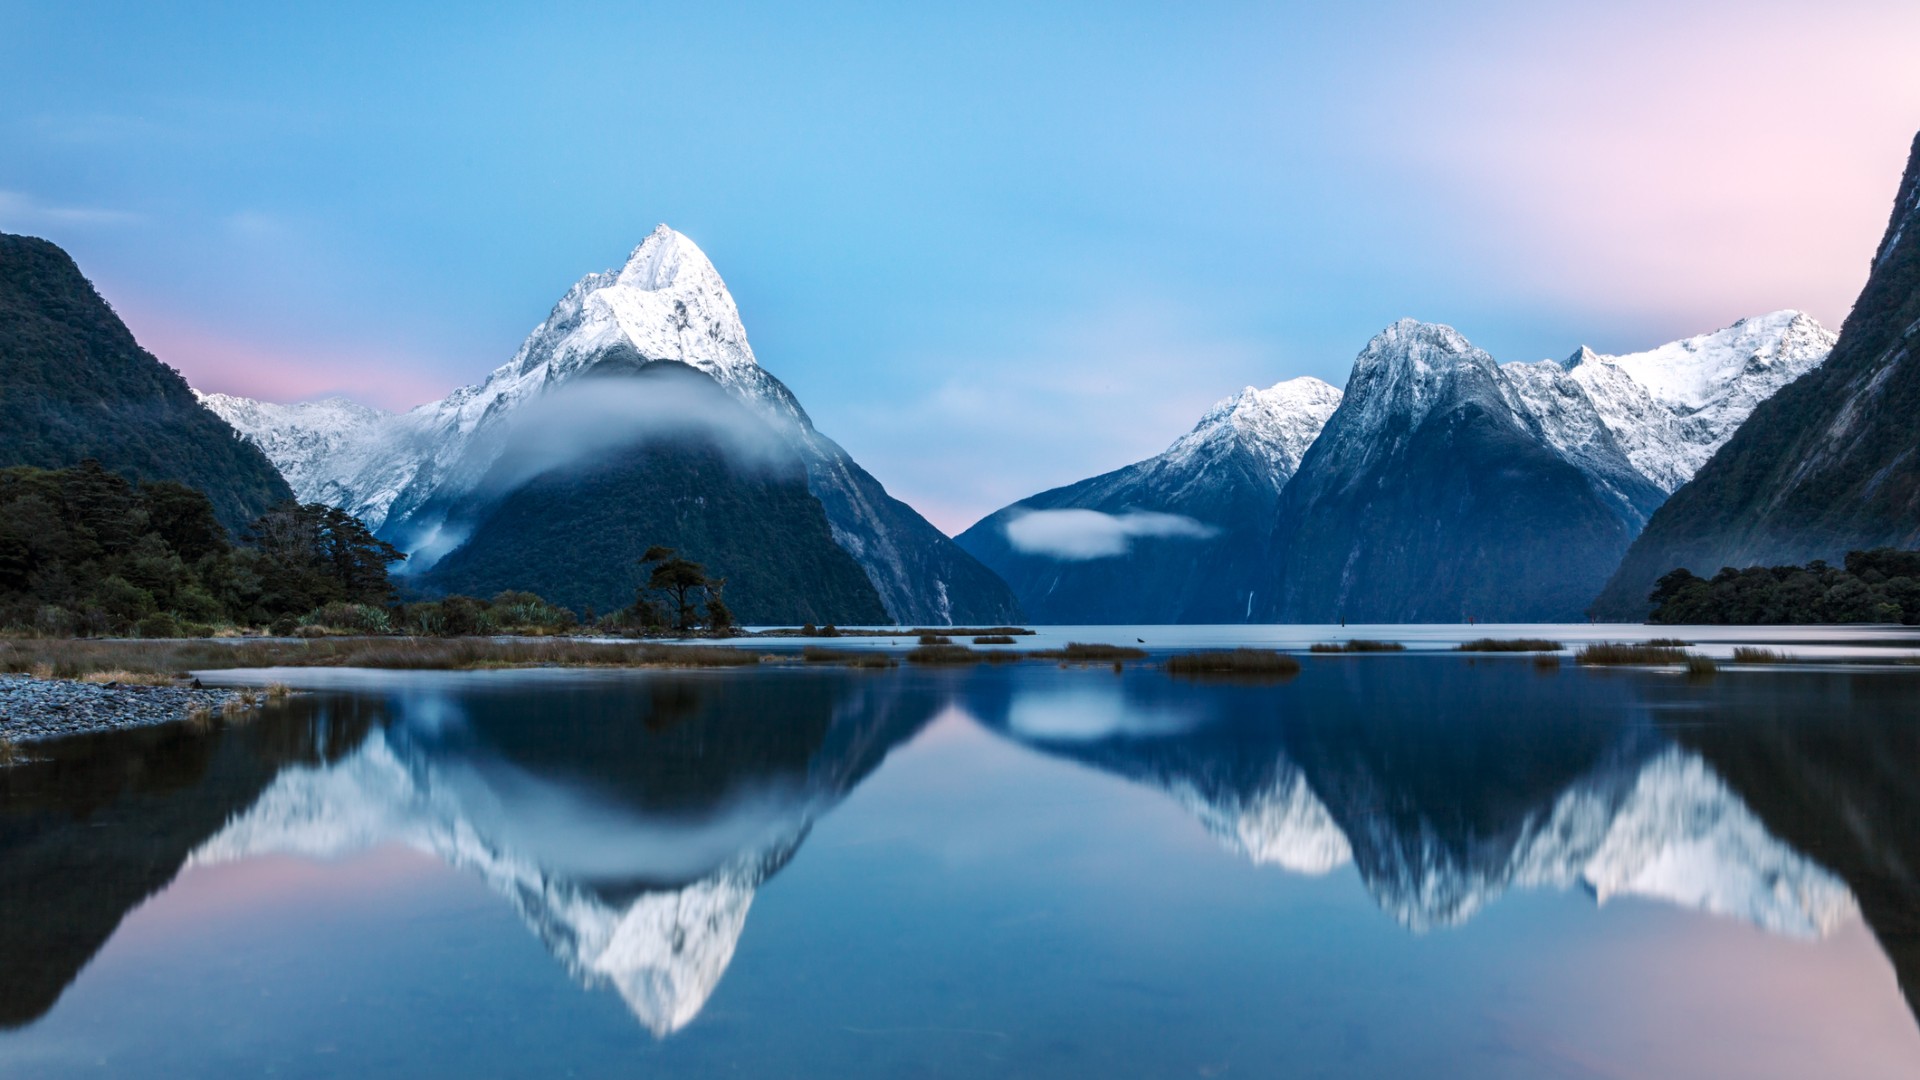 Awesome sunrise over Mitre peak and mountains of Milford Sound, Fiordland National Park, Southland, New Zealand